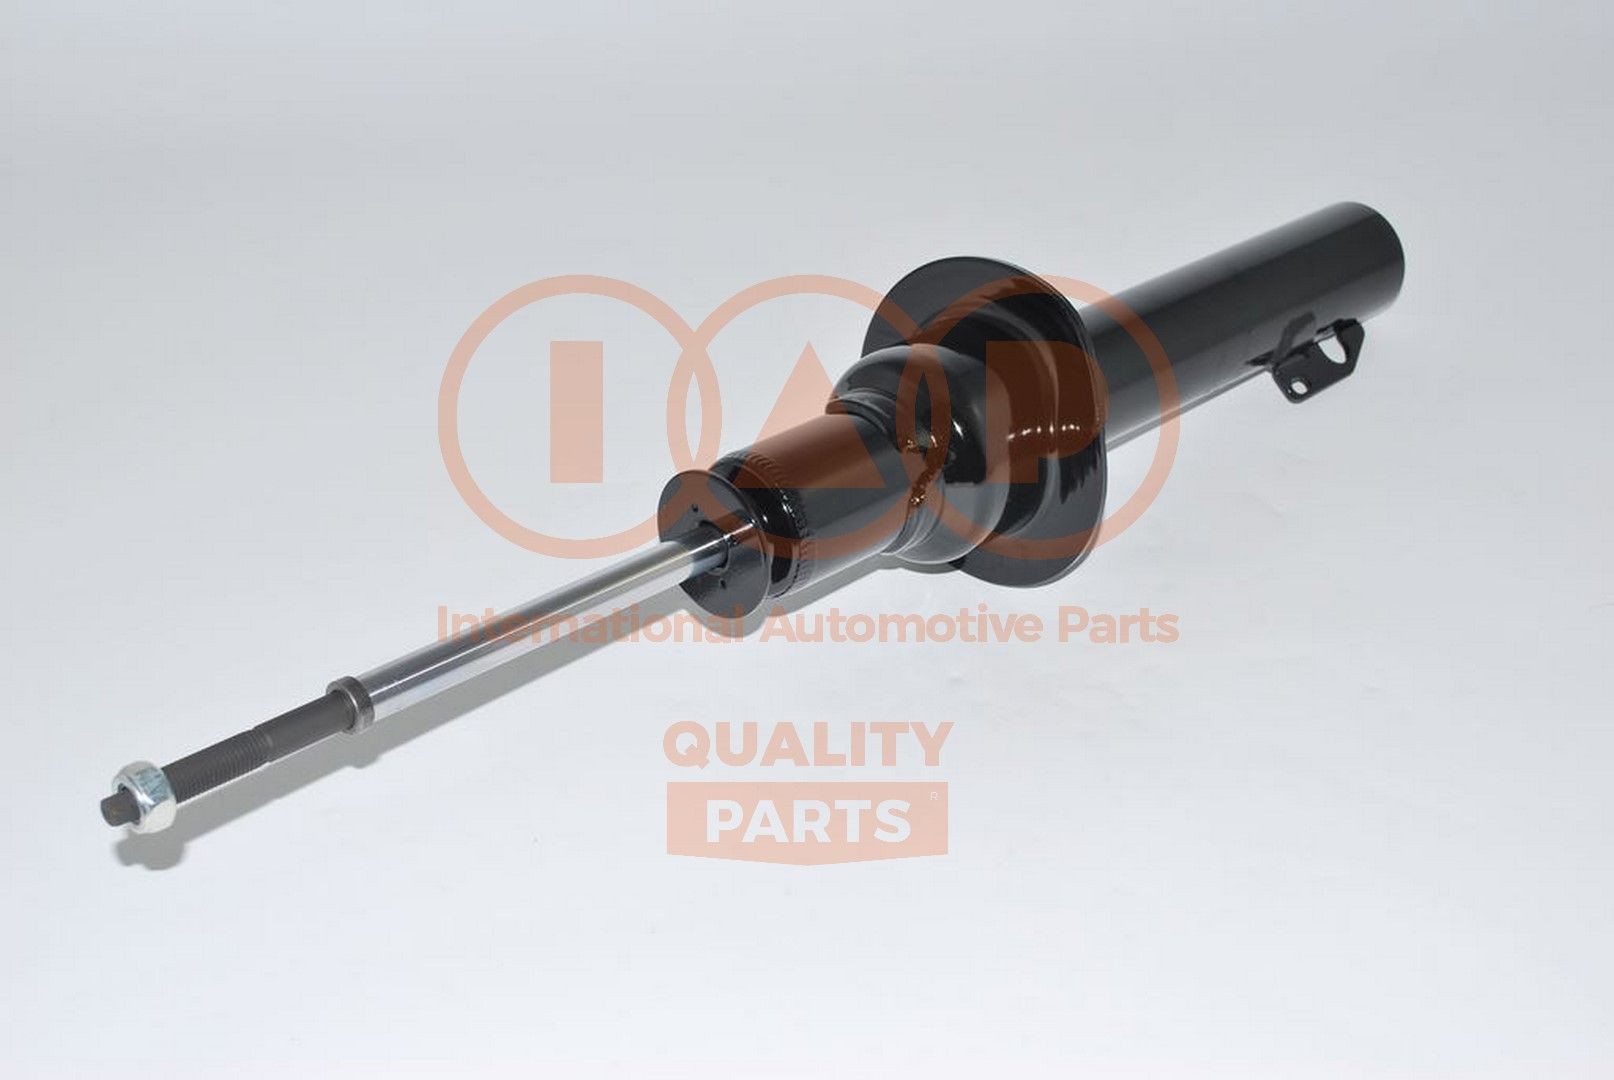 IAP QUALITY PARTS Front Axle Left, Front Axle Right, Gas Pressure, 507x363 mm, Suspension Strut, Top pin Shocks 504-10047 buy